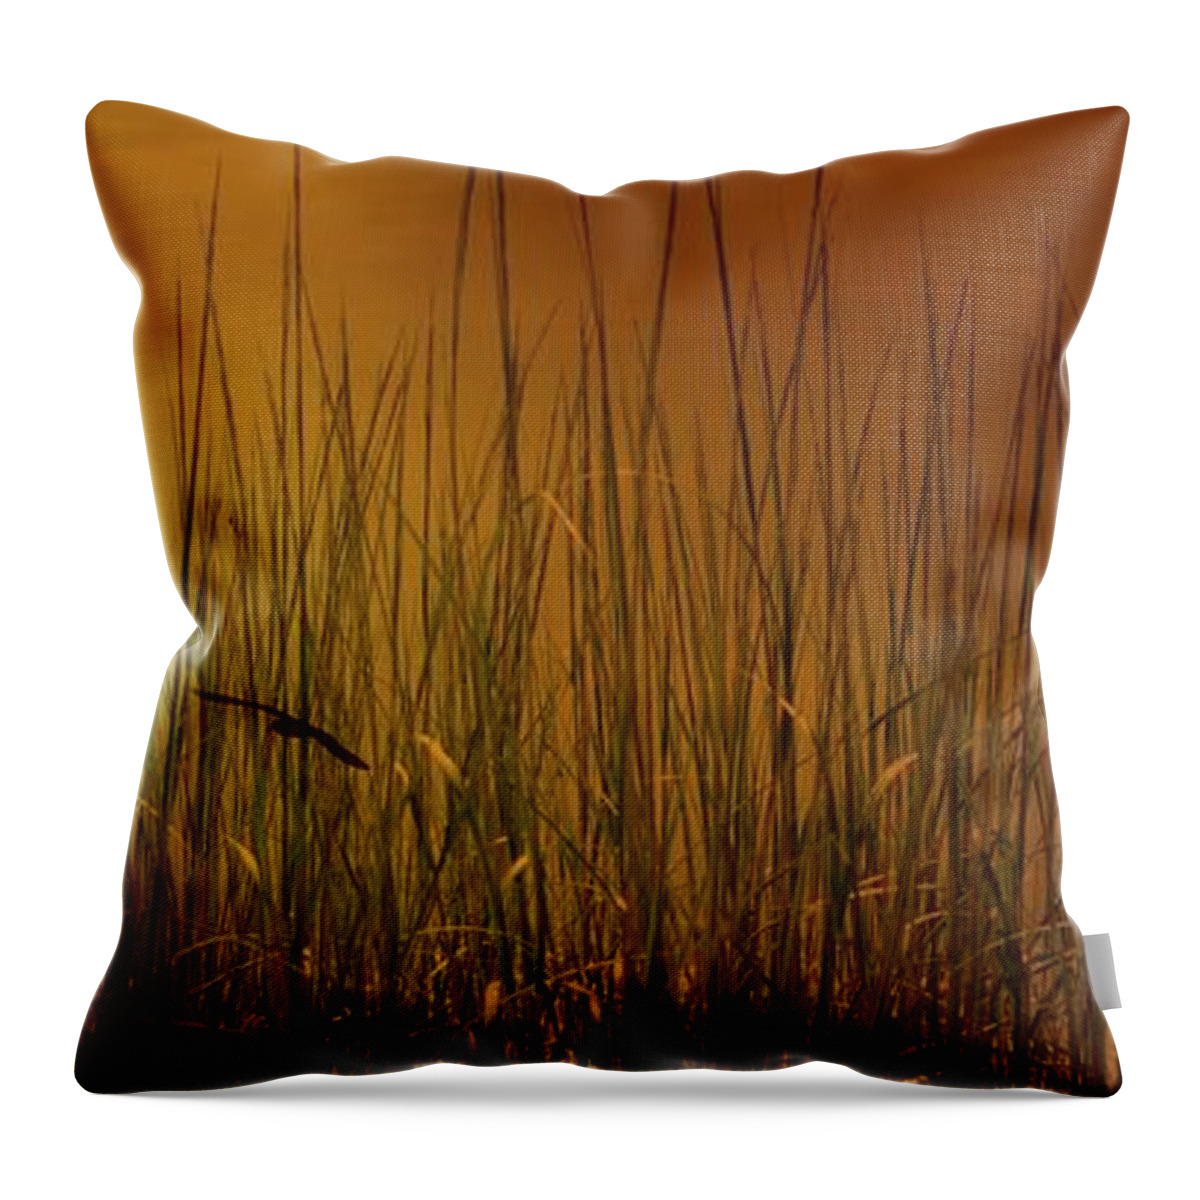 Marcia Lee Jones Throw Pillow featuring the photograph Beach Grasses by Marcia Lee Jones